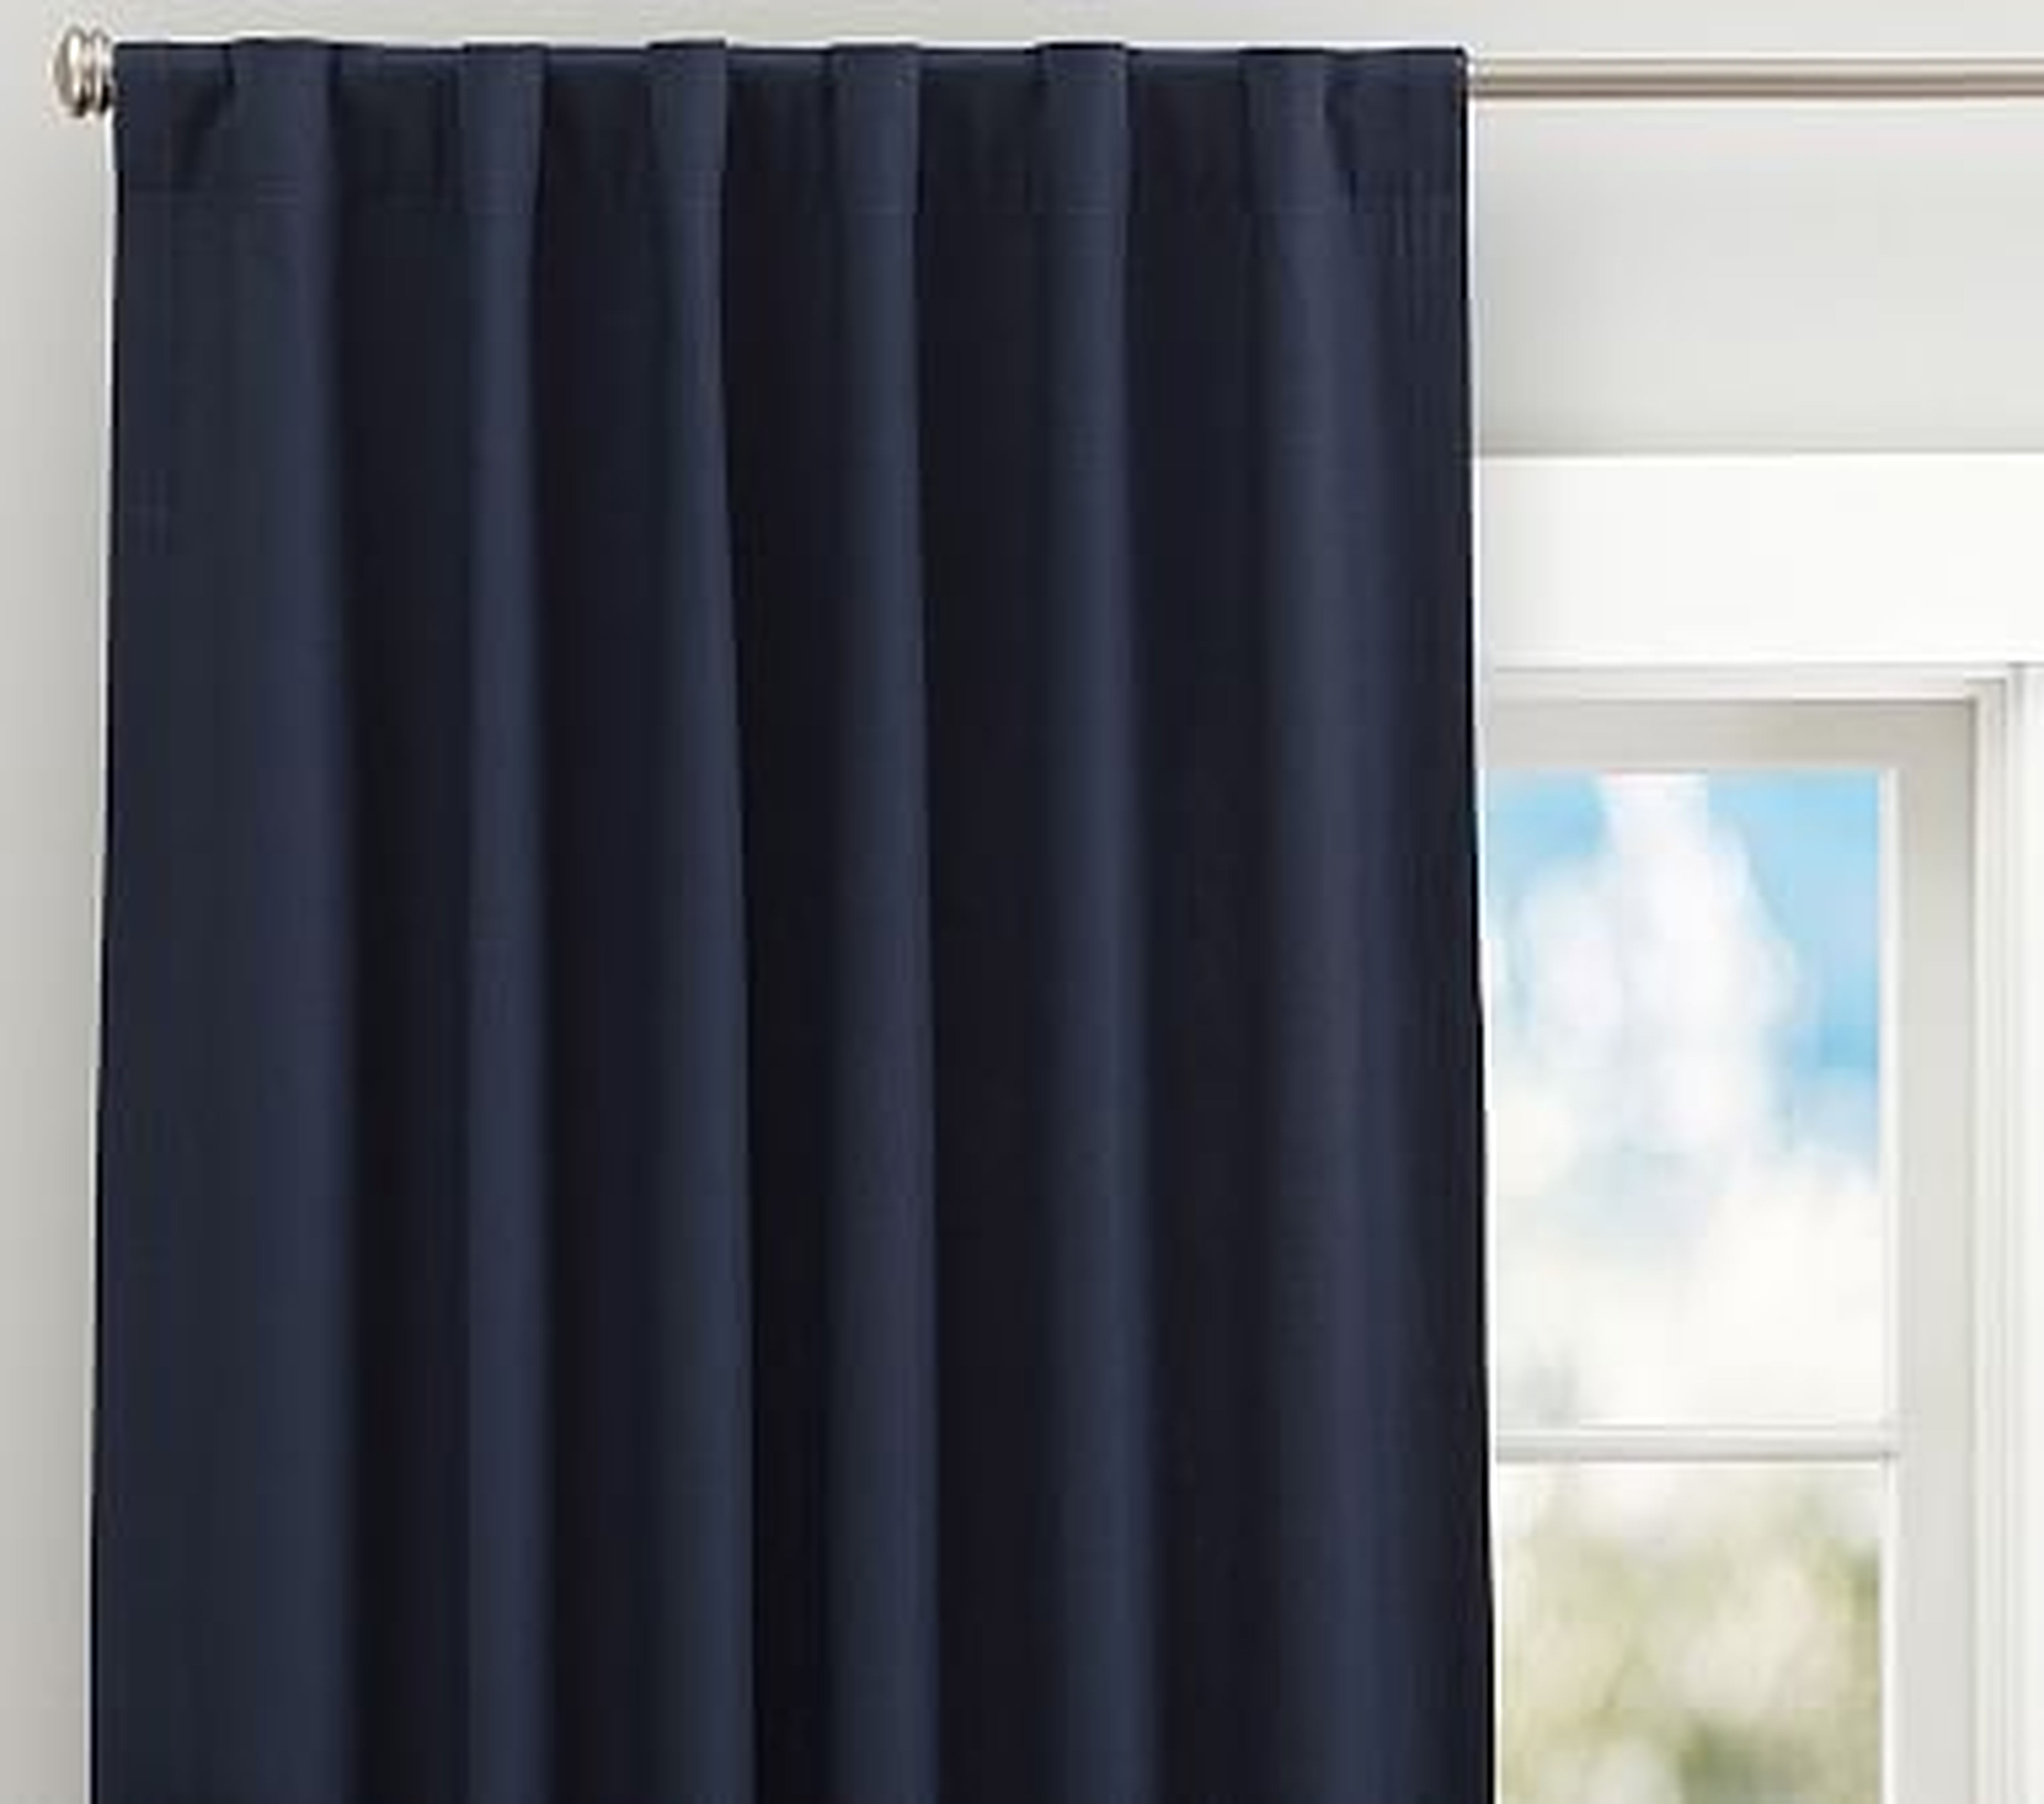 Quincy Cotton Canvas Blackout Curtain, 84", Navy - Pottery Barn Kids